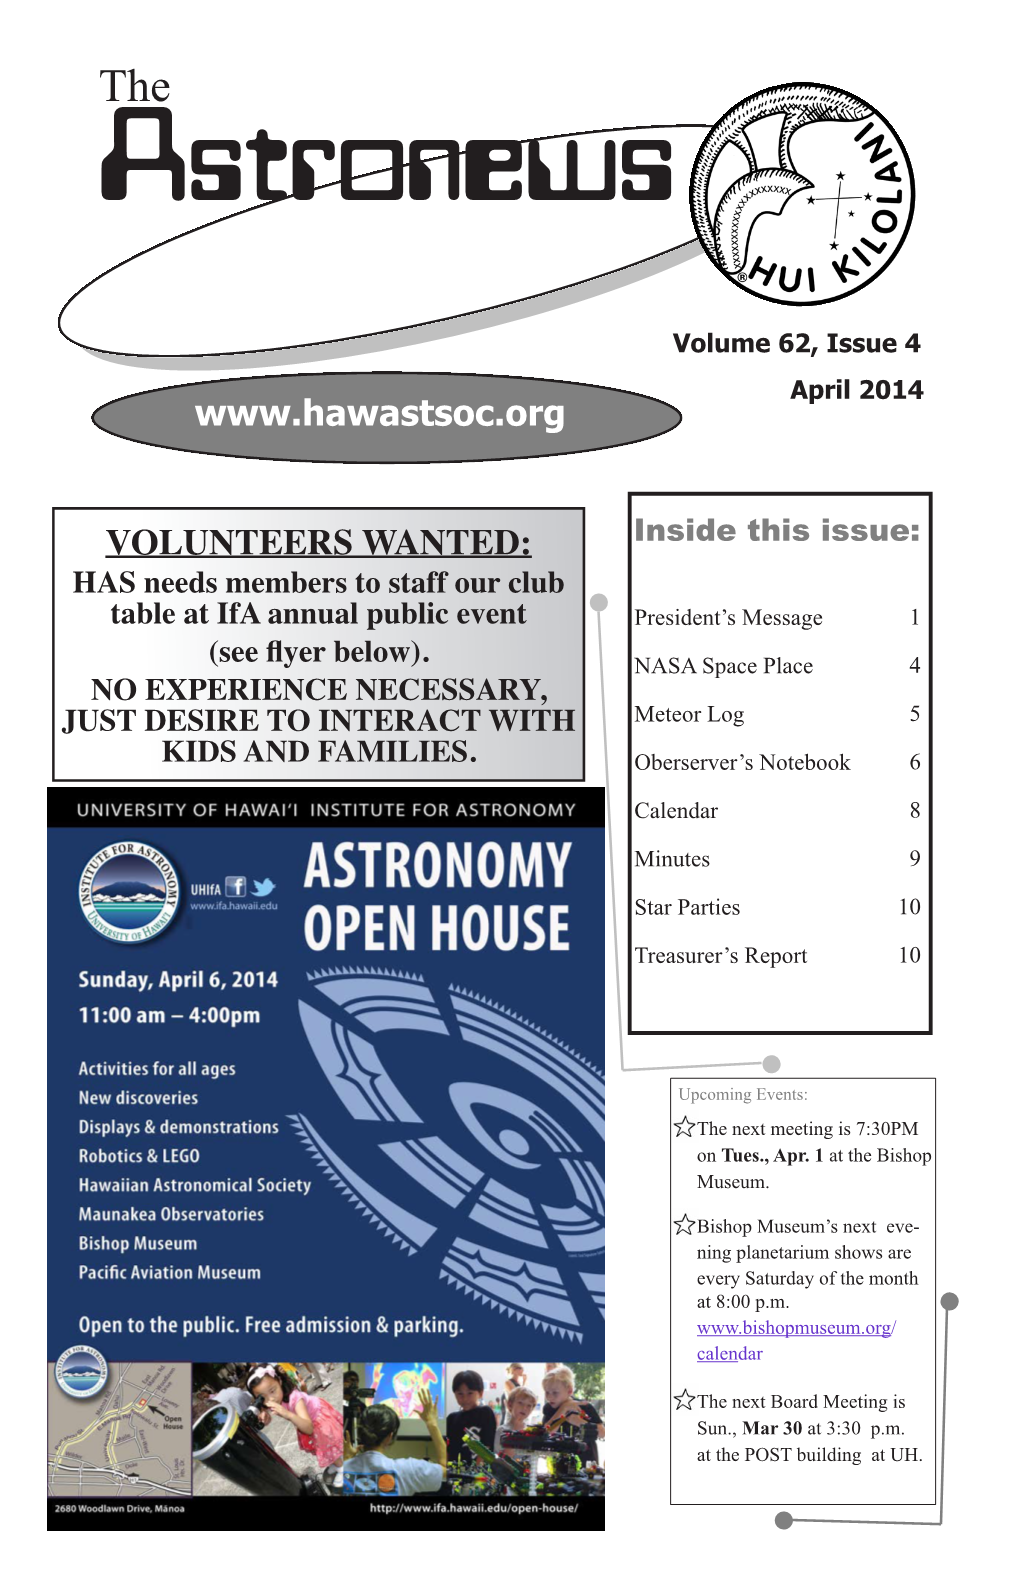 Astronews NO EXPERIENCE NECESSAR Needs Members to Staff Our Club to Staff Our HAS Needs Members JUST